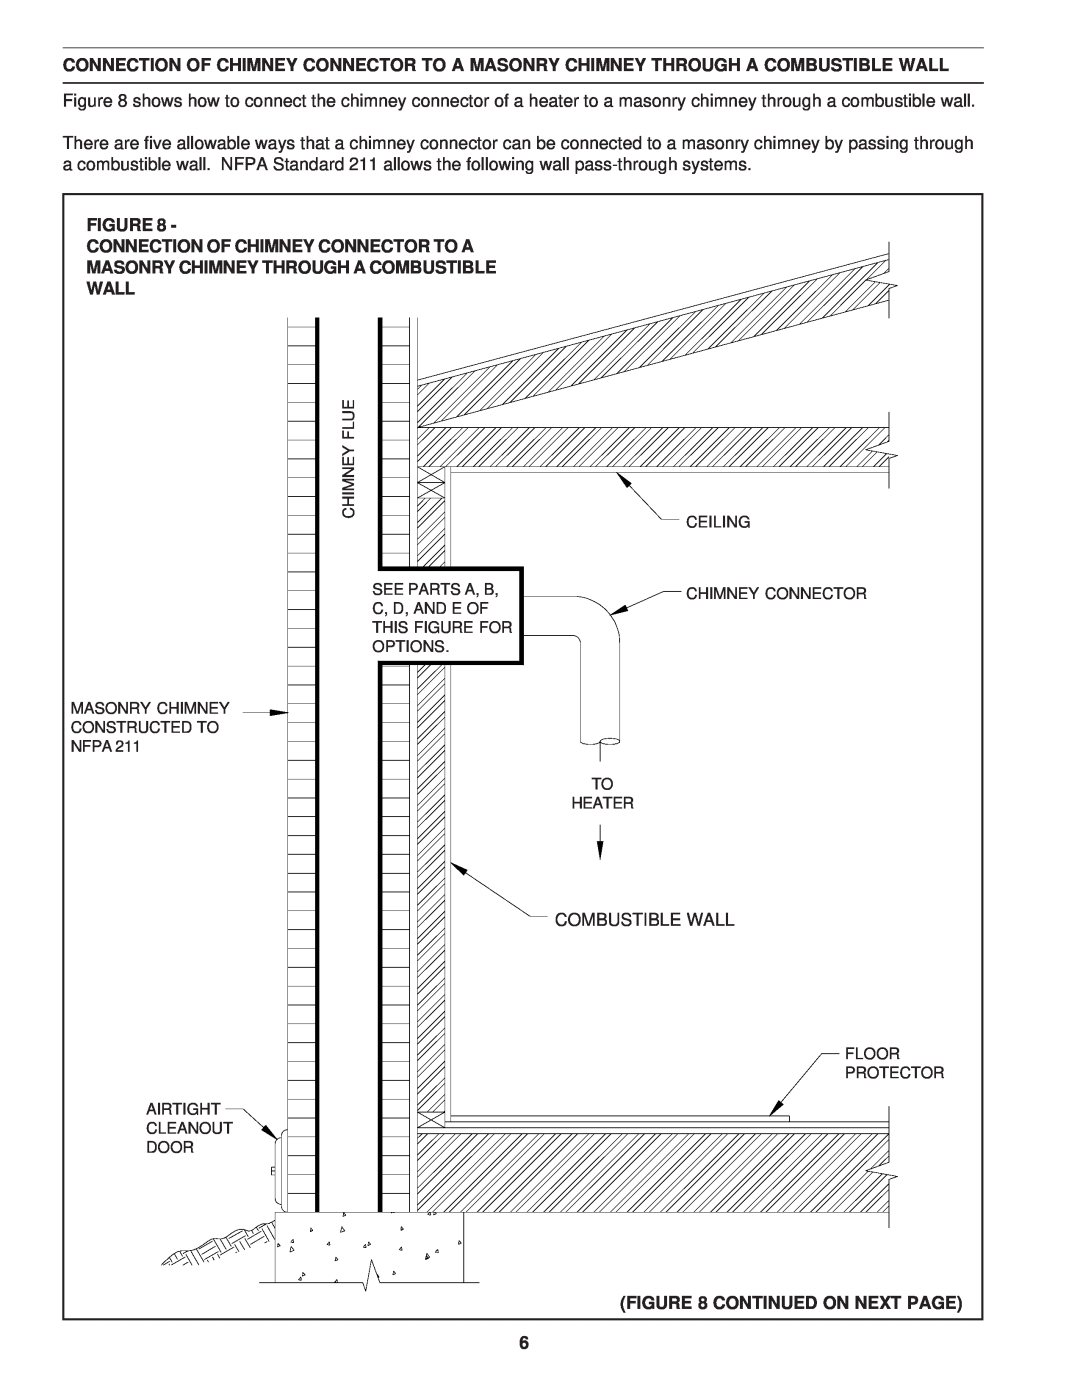 United States Stove 1261 Figure Connection Of Chimney Connector To A, Masonry Chimney Through A Combustible Wall 